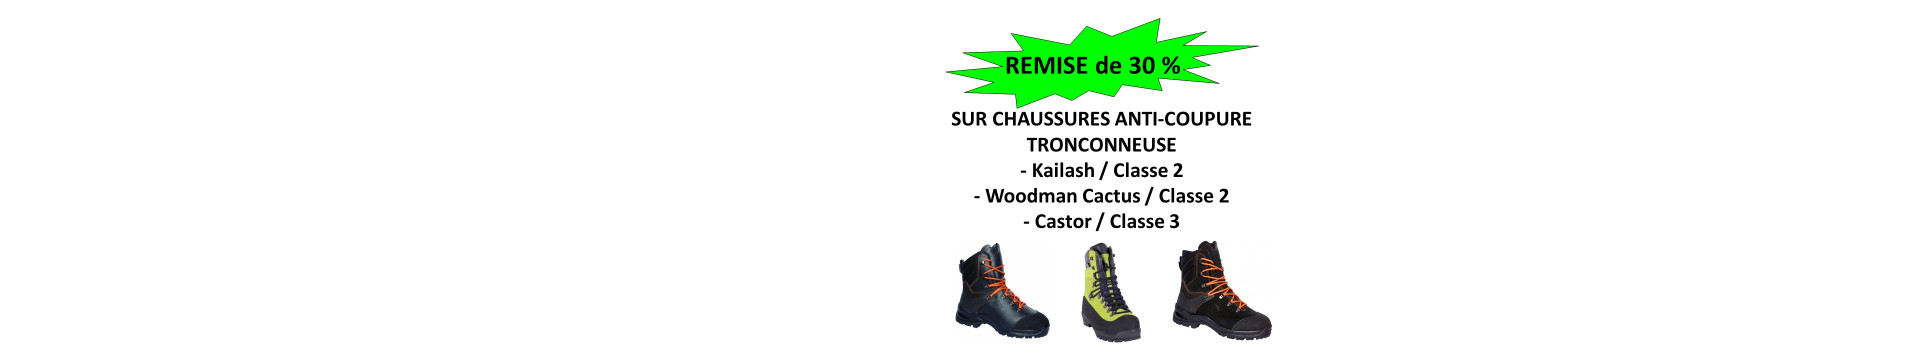 CHAUSSURES -30%